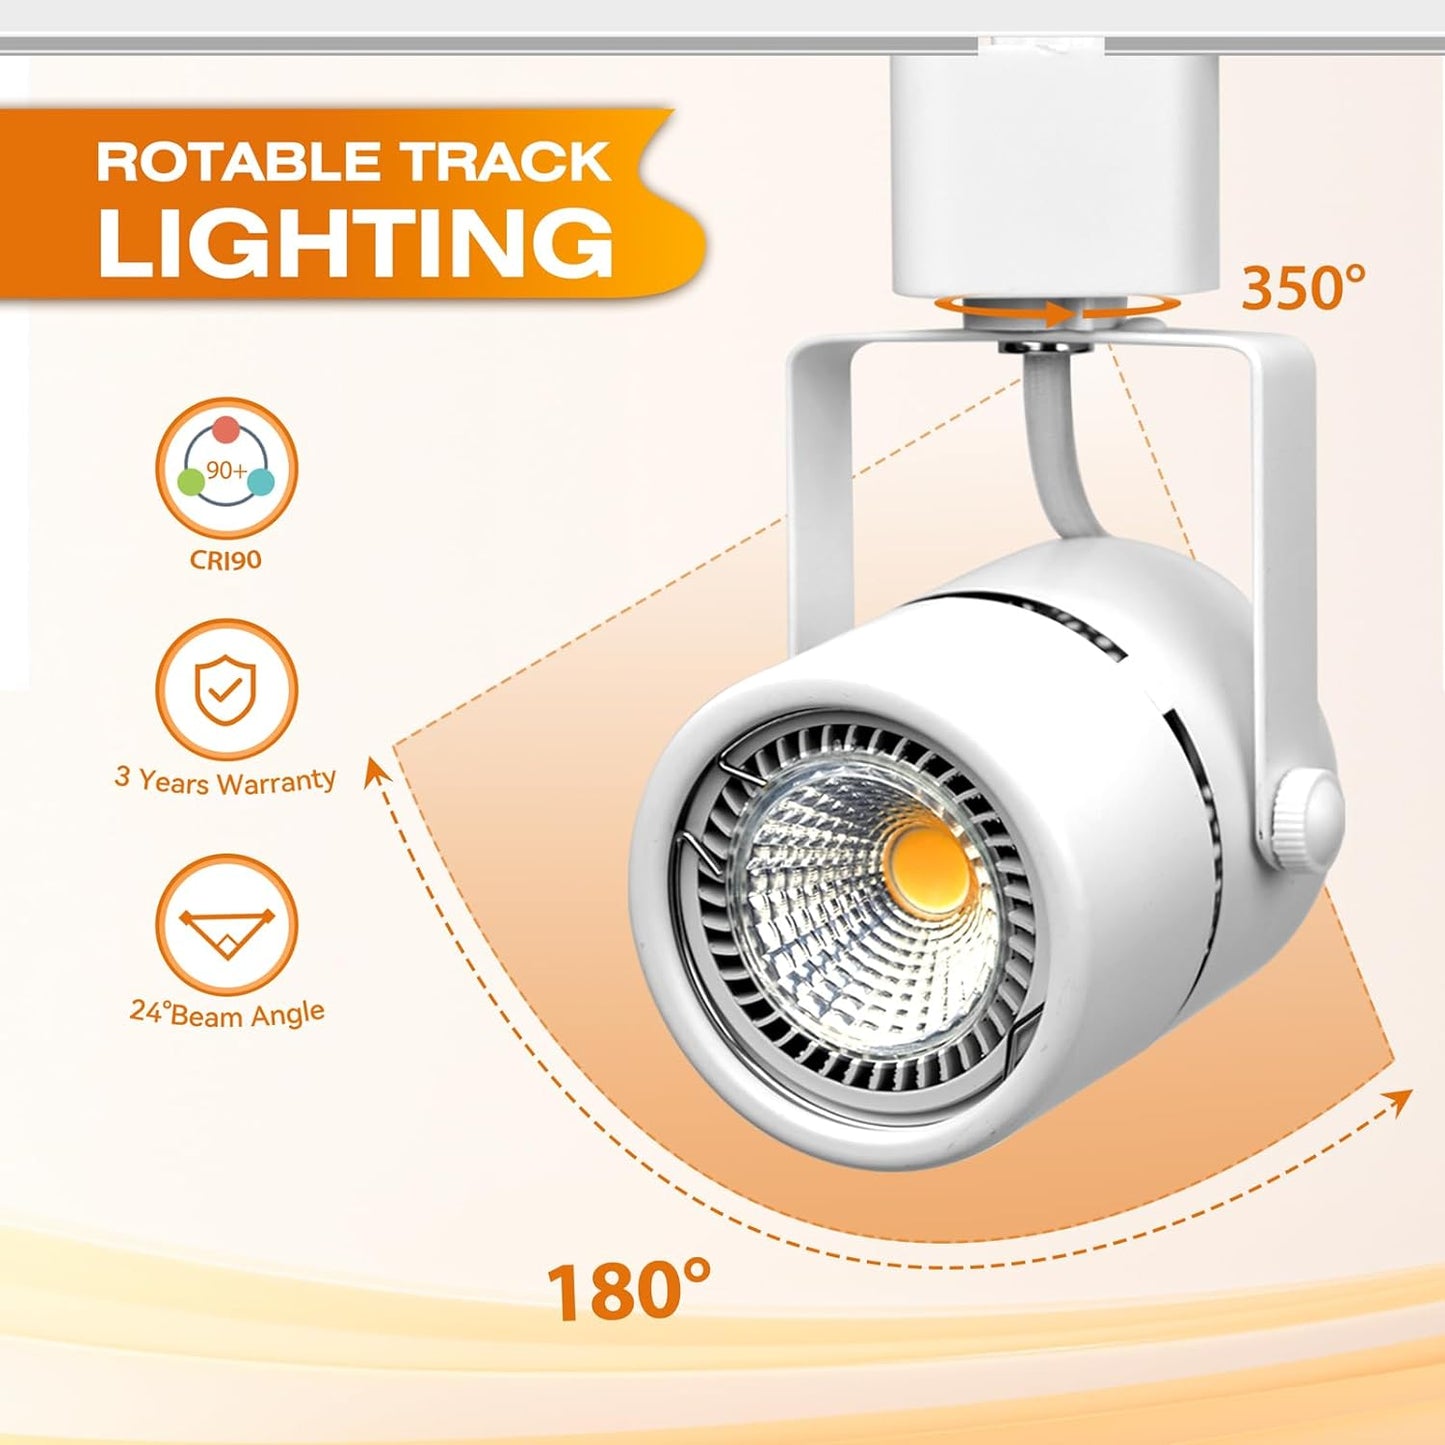 7.5W H Type Track Lighting Heads, Dimmable Bright 5500K Cool White, Flicker Free CRI90+ Track Lighting Fixtures